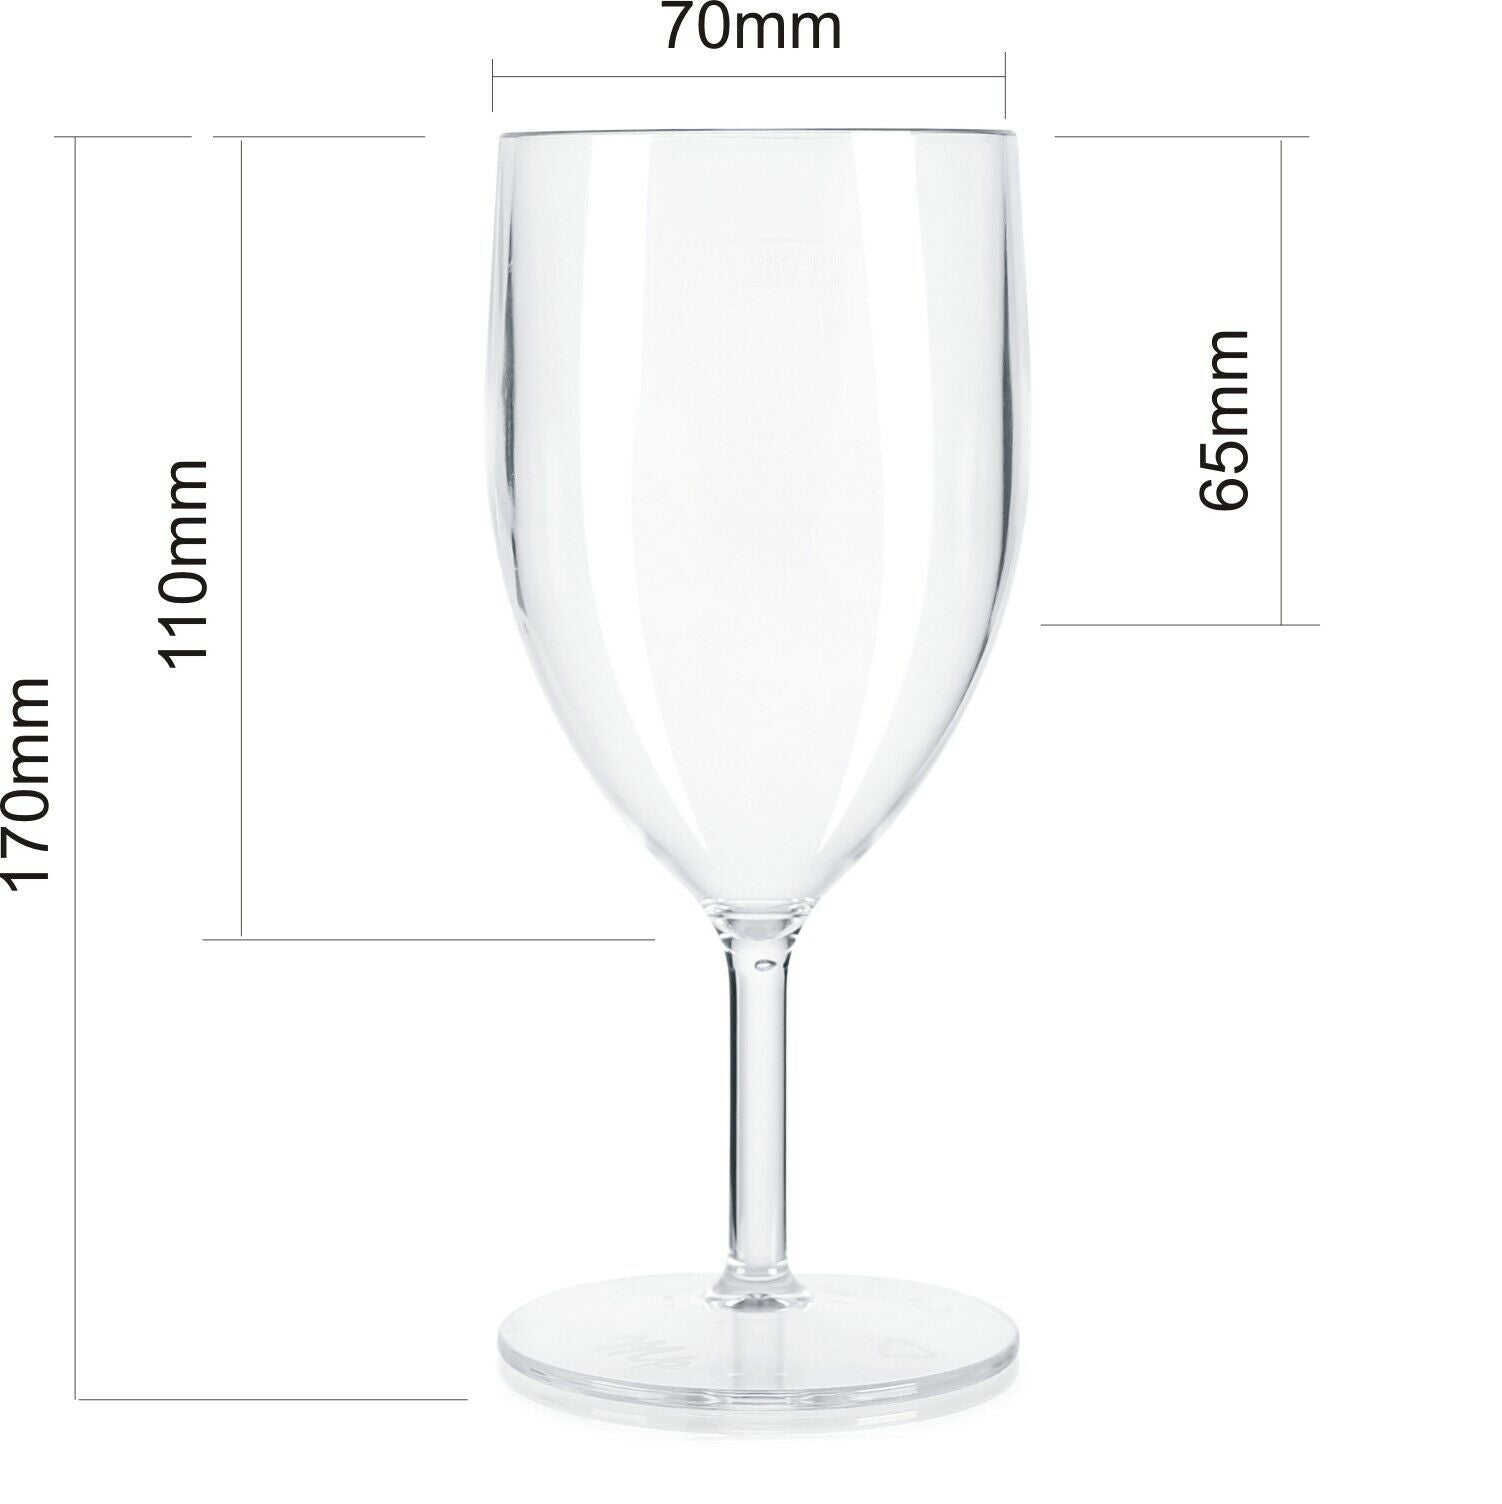 10 x Wine Glasses (Clear) – Made from Strong Reusable Plastic CE Marked with 125ml, 175ml, 250ml Transparent 1-Piece Glass (Pack of 10)-5056020108054-PCUP-WINEREUSEx10-Product Pro-Baby Shower, BBQ, Garden, Picnic, Plastic Glasses, Plastic Wine Glasses, Transparent Wine Glasses, Wine Glasses